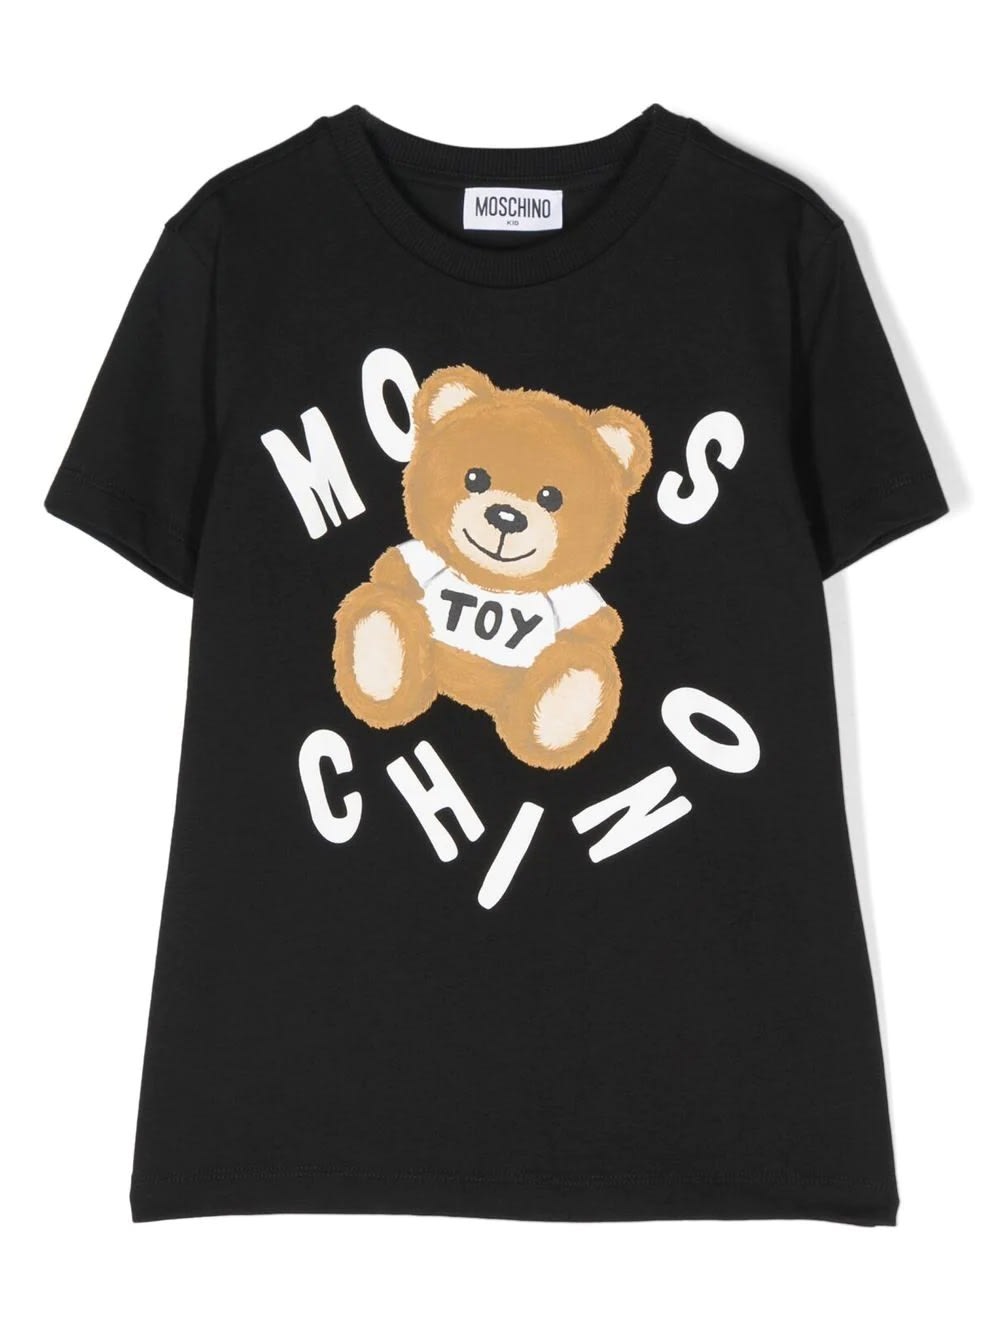 MOSCHINO BLACK T-SHIRT WITH MOSCHINO TEDDY BEAR DESTRUCTURED